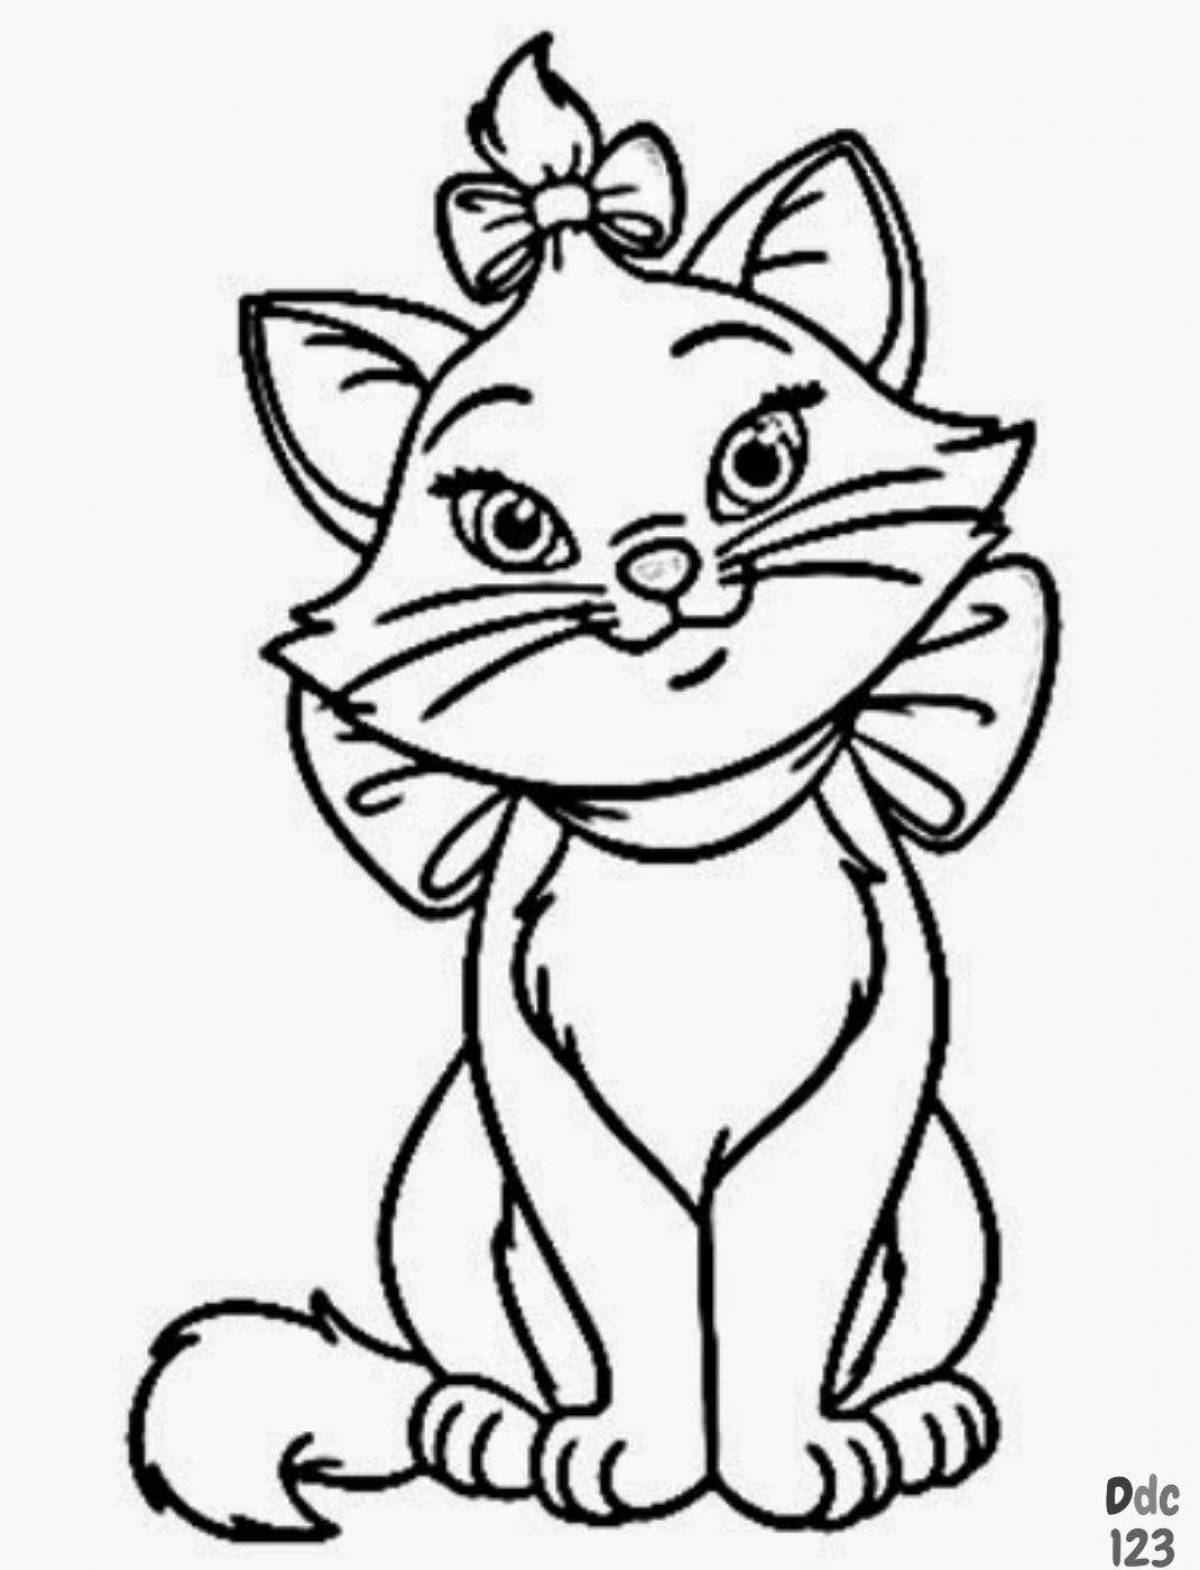 Coloring page mischievous kitten with a bow